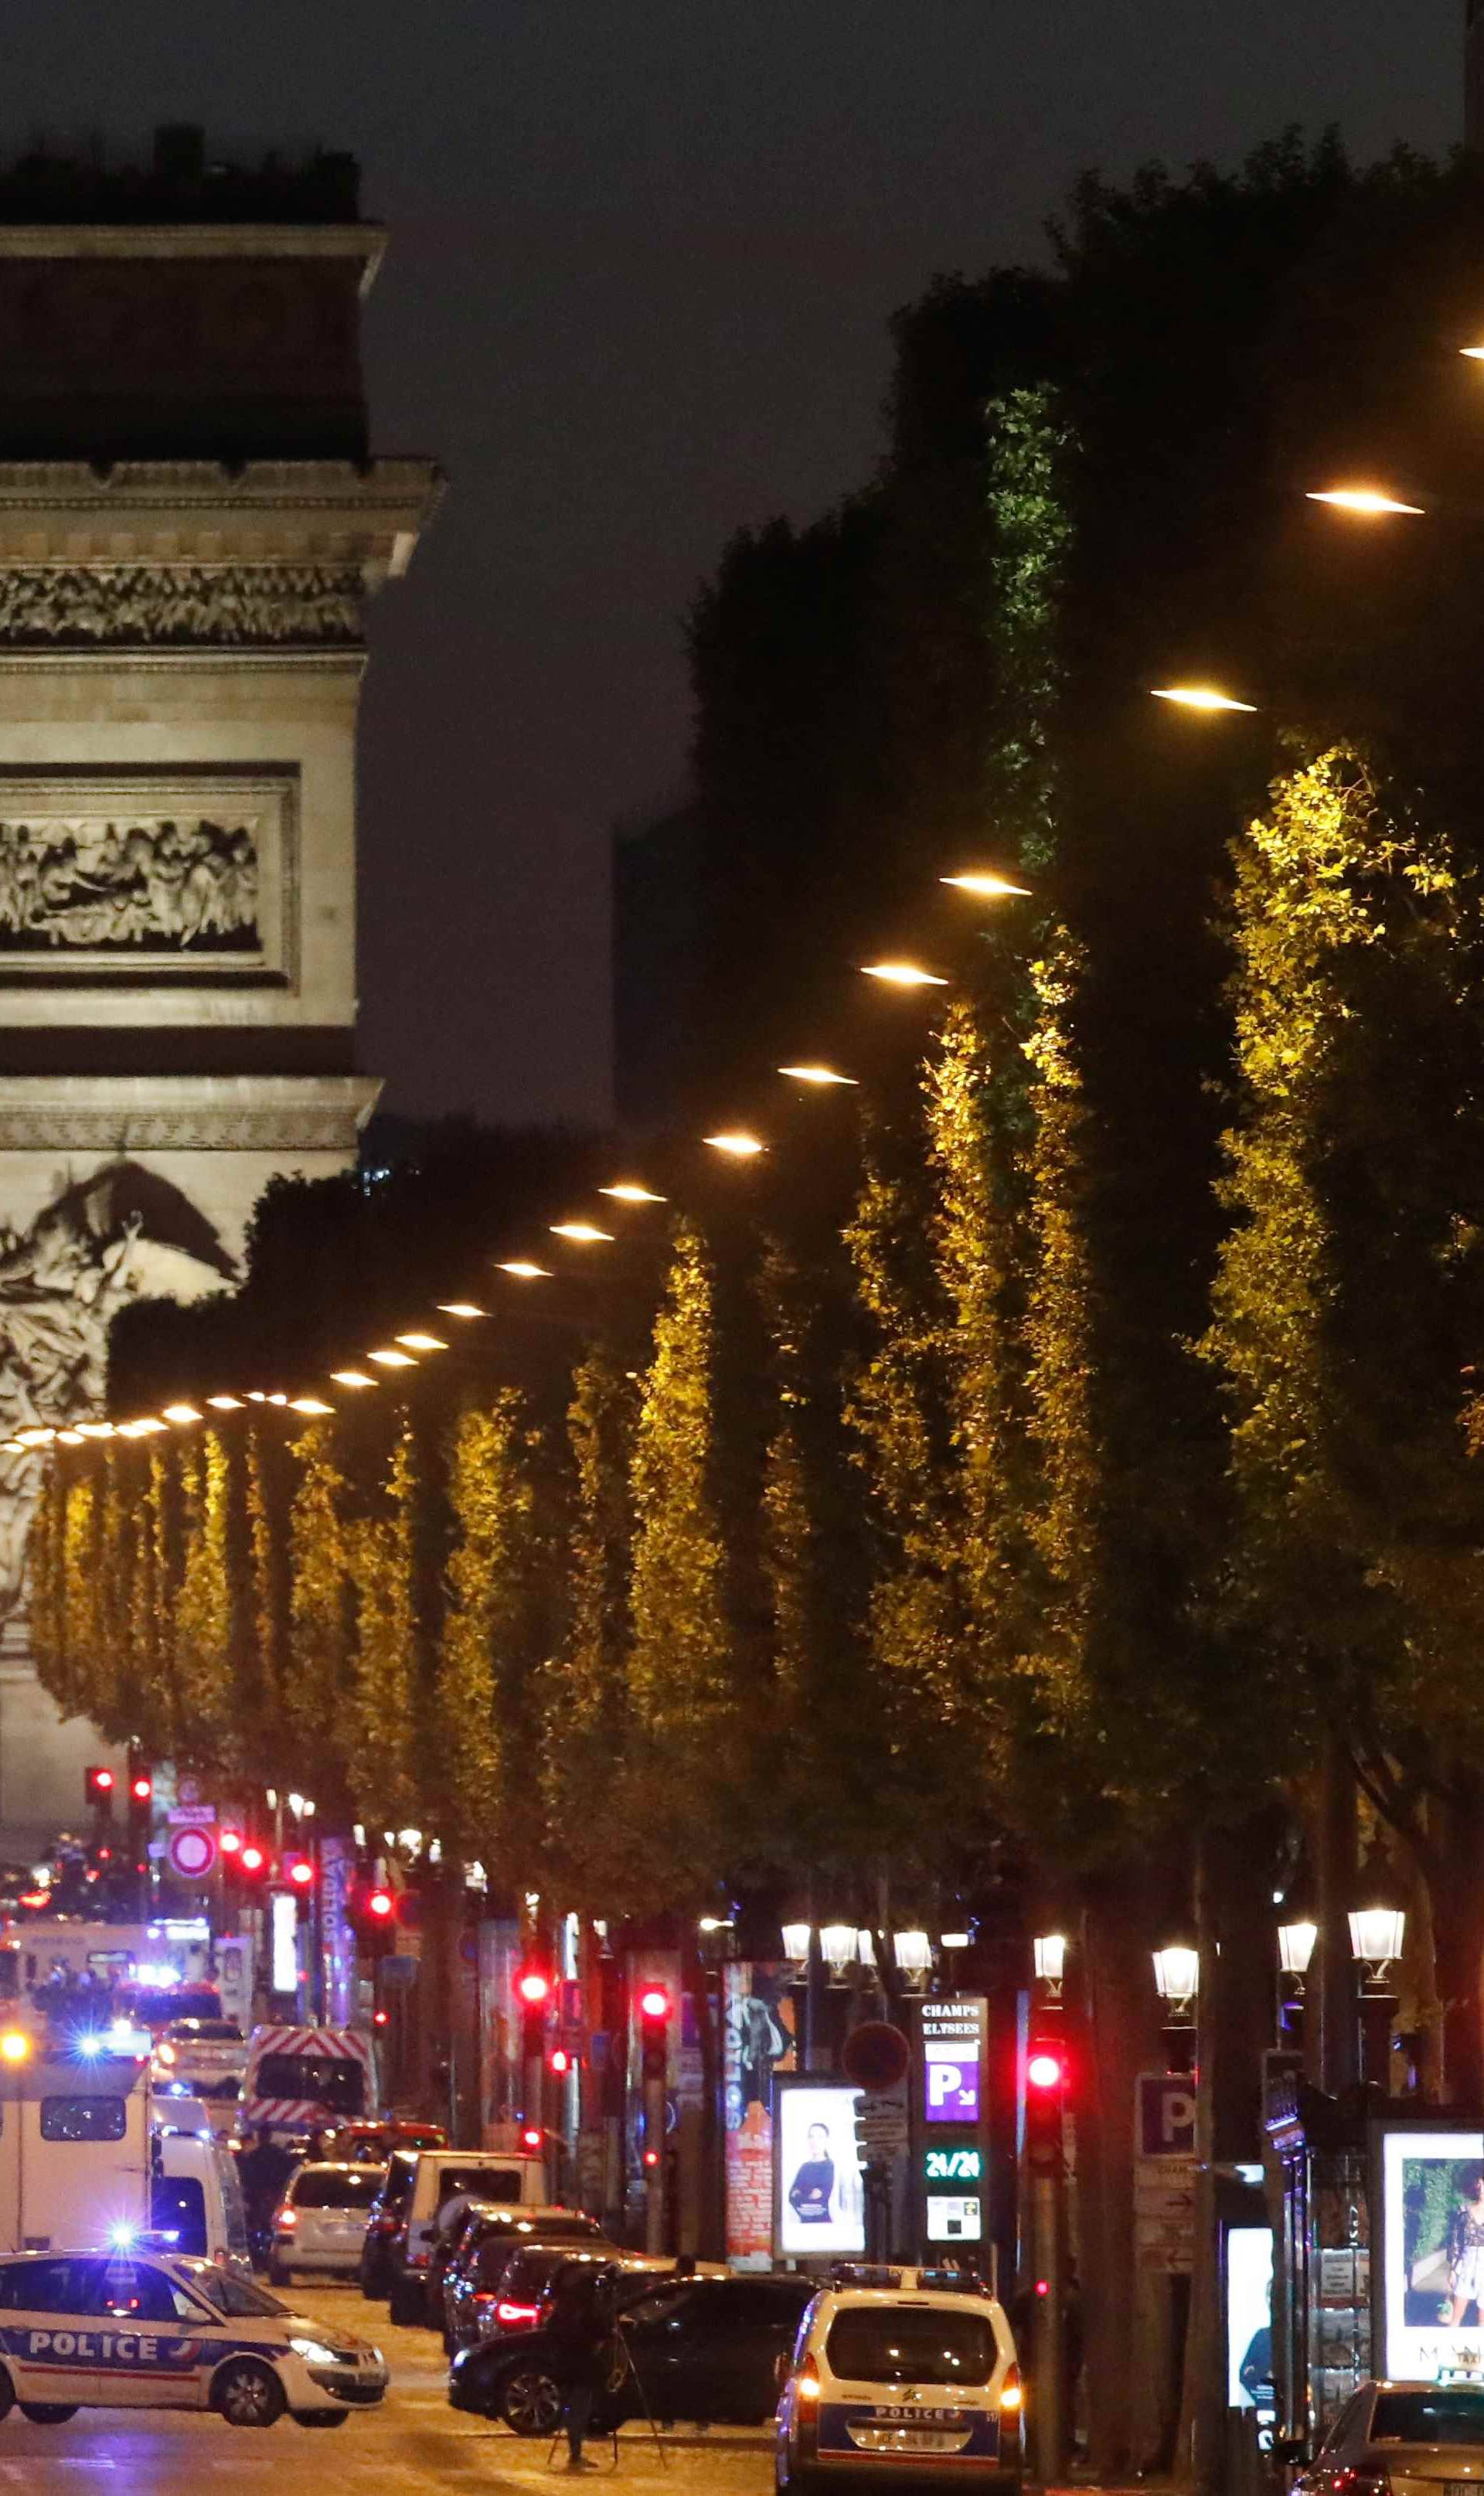 Police secure the Champs Elysees Avenue after one policeman was killed and another wounded in a shooting incident in Paris